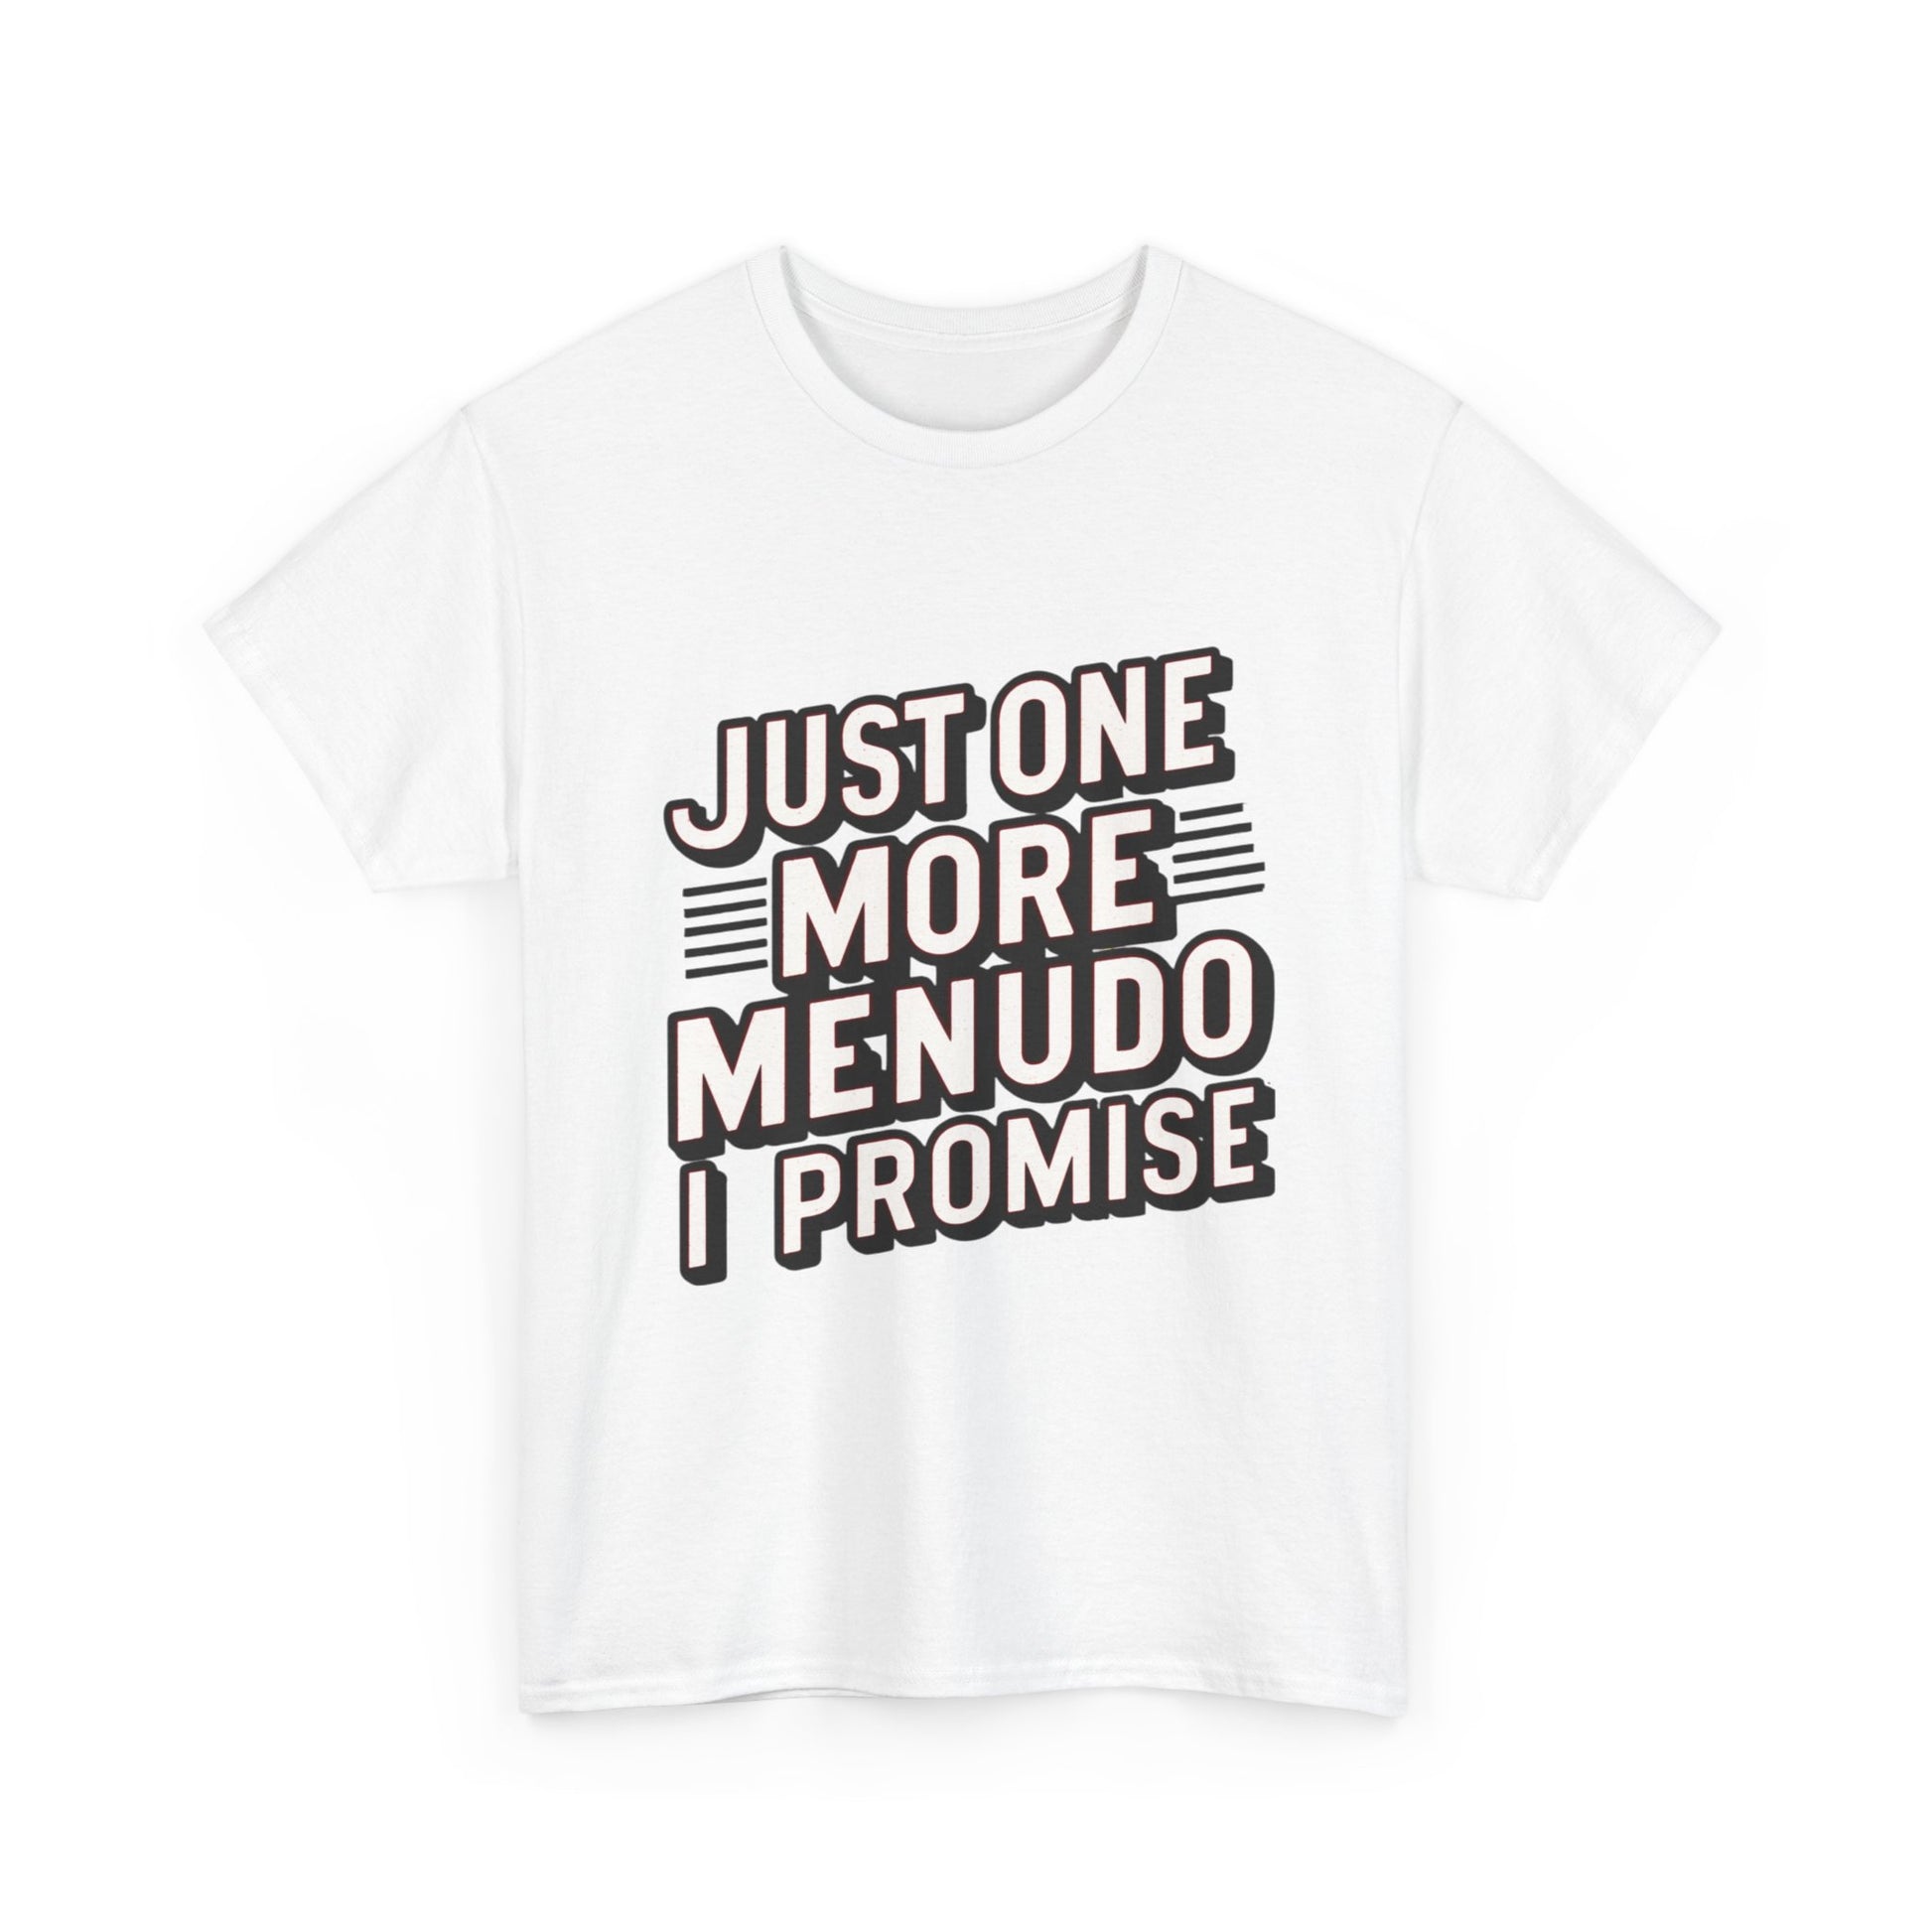 Just One More Menudo I Promise Mexican Food Graphic Unisex Heavy Cotton Tee Cotton Funny Humorous Graphic Soft Premium Unisex Men Women White T-shirt Birthday Gift-42